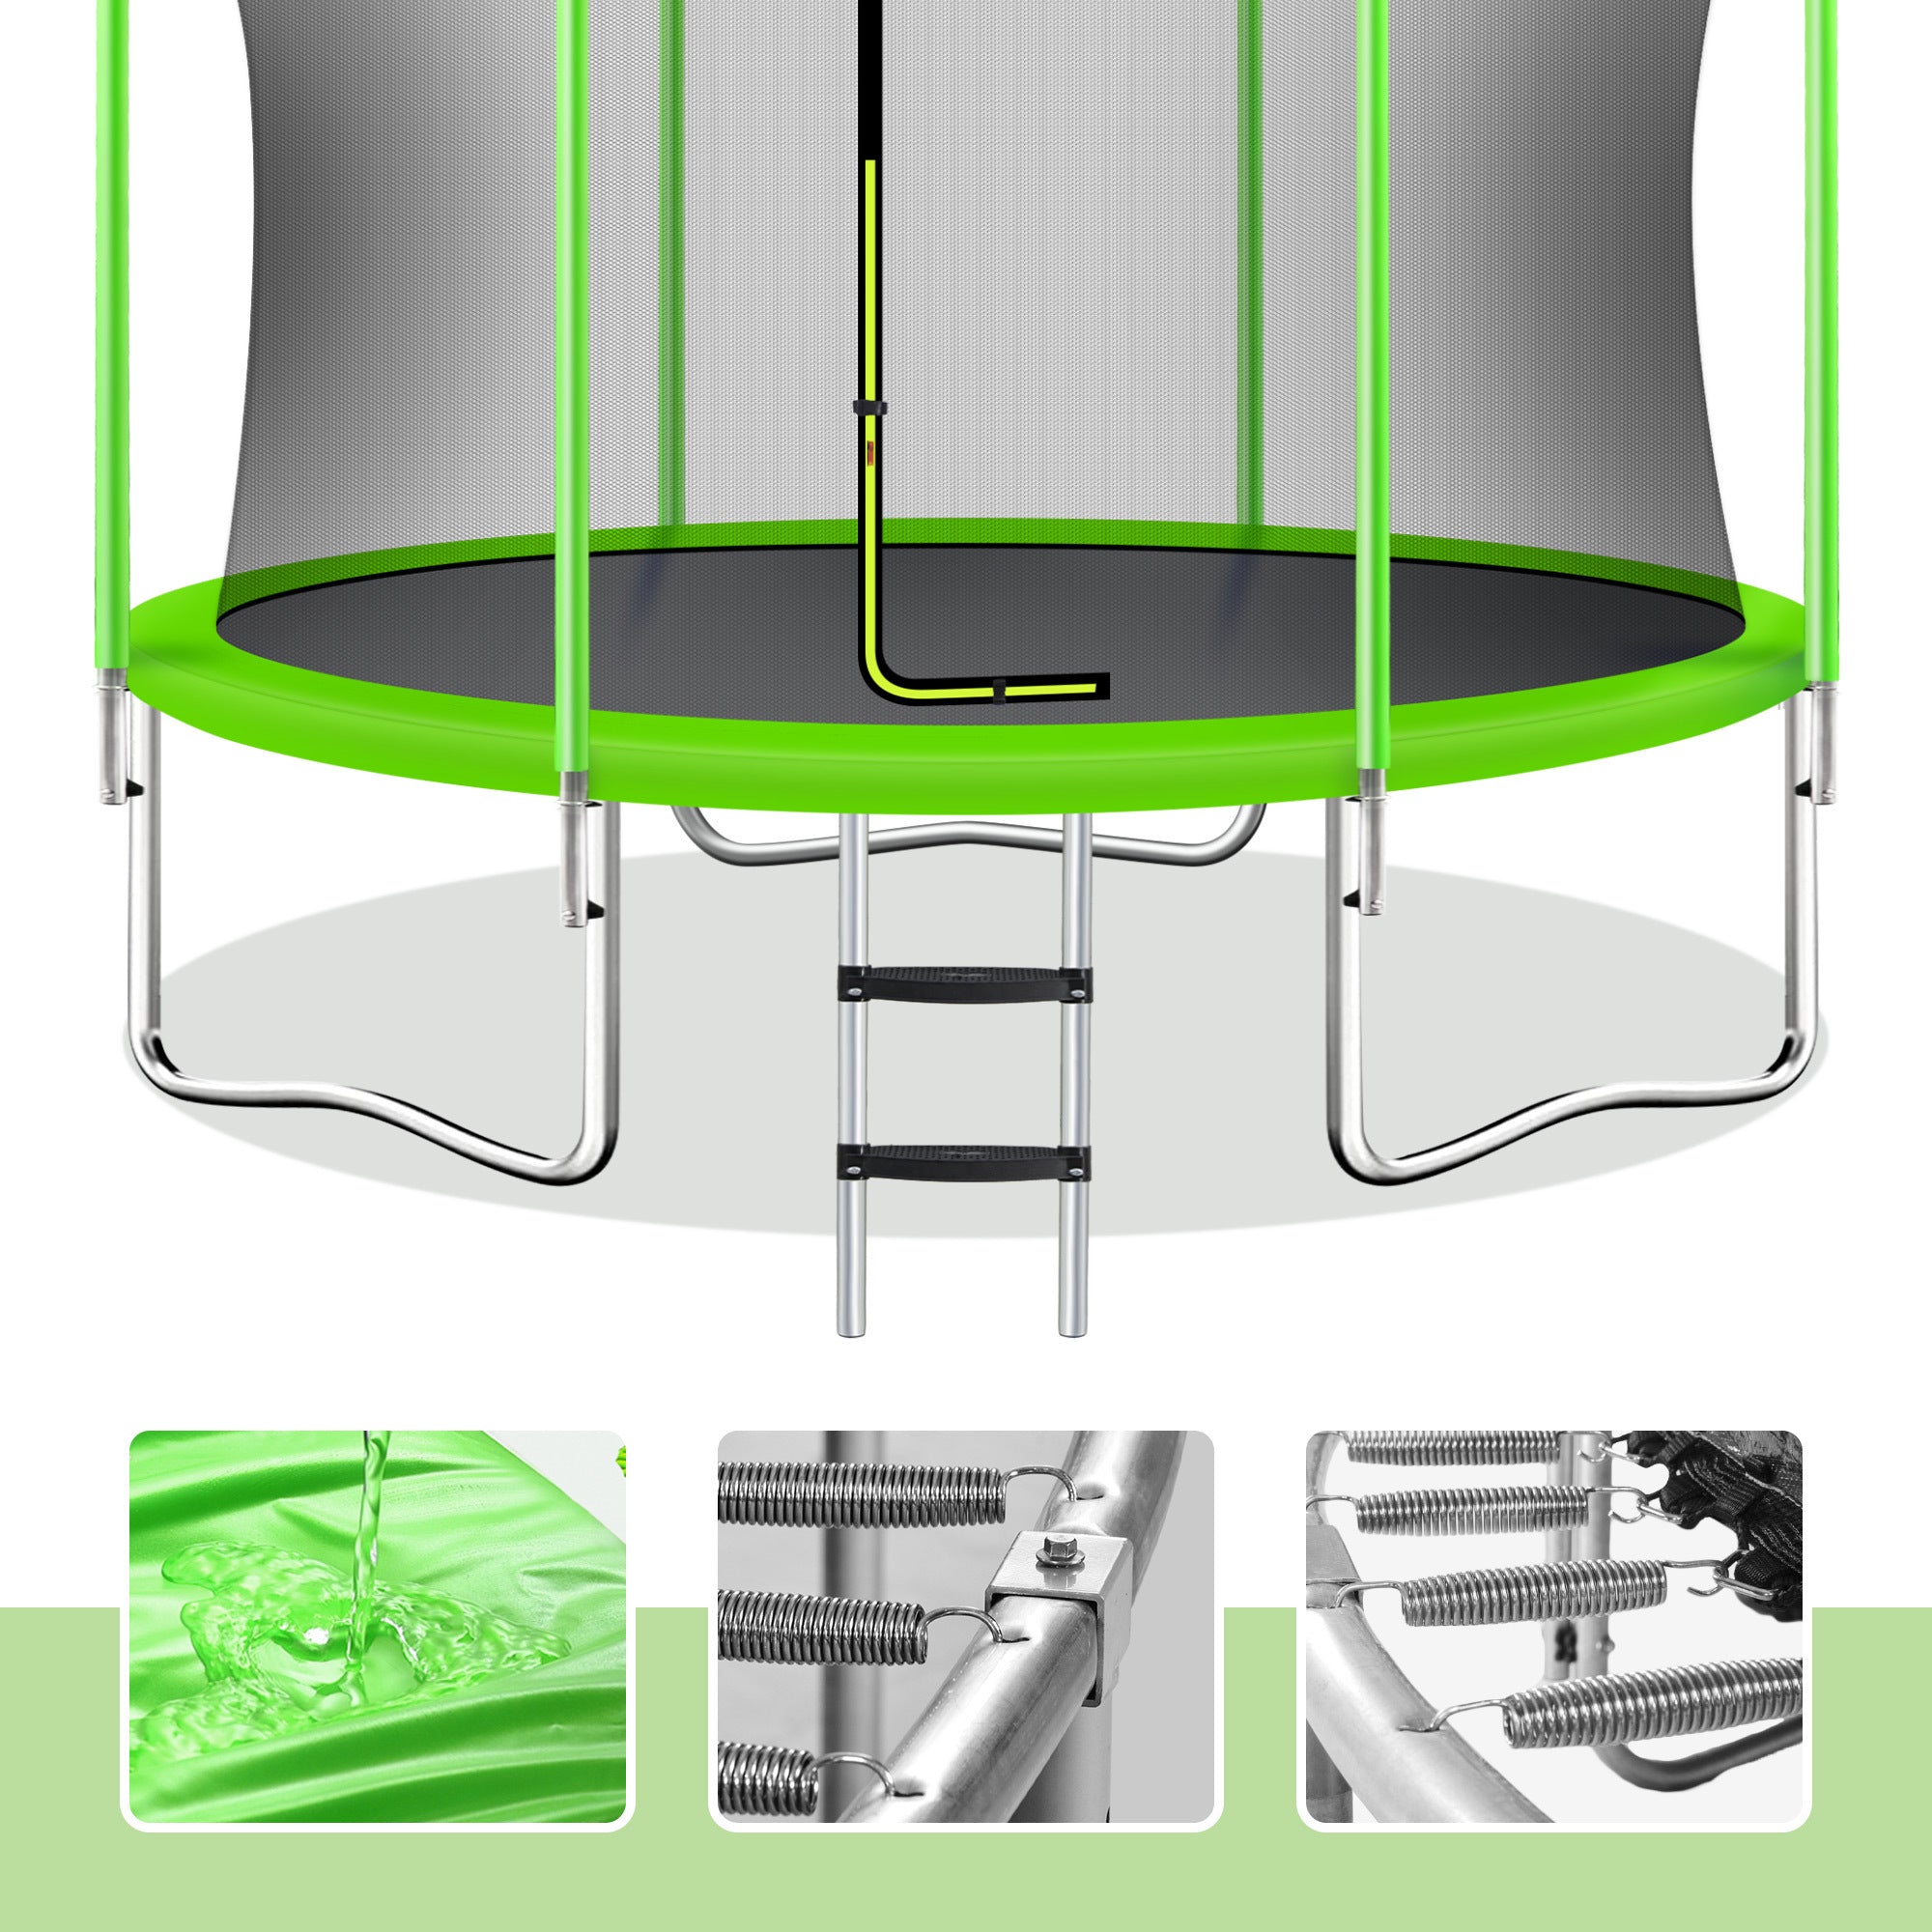 10FT Trampoline for Kids with Safety Enclosure Net green-metal